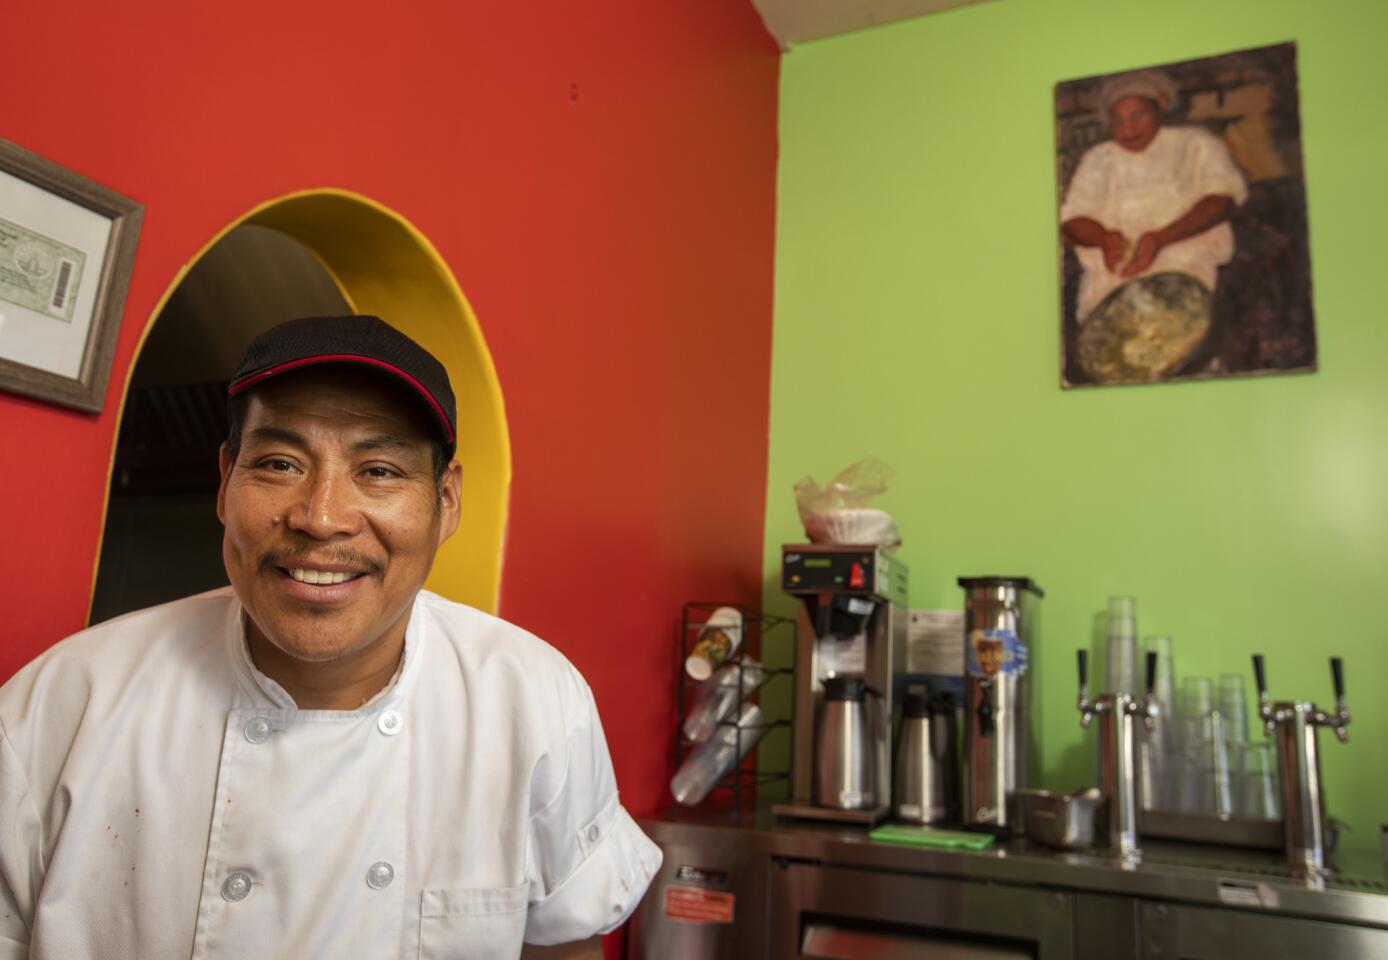 Hector Martinez runs the Oaxacan-style restaurant with his wife and daughter. The painting on the wall is of him.